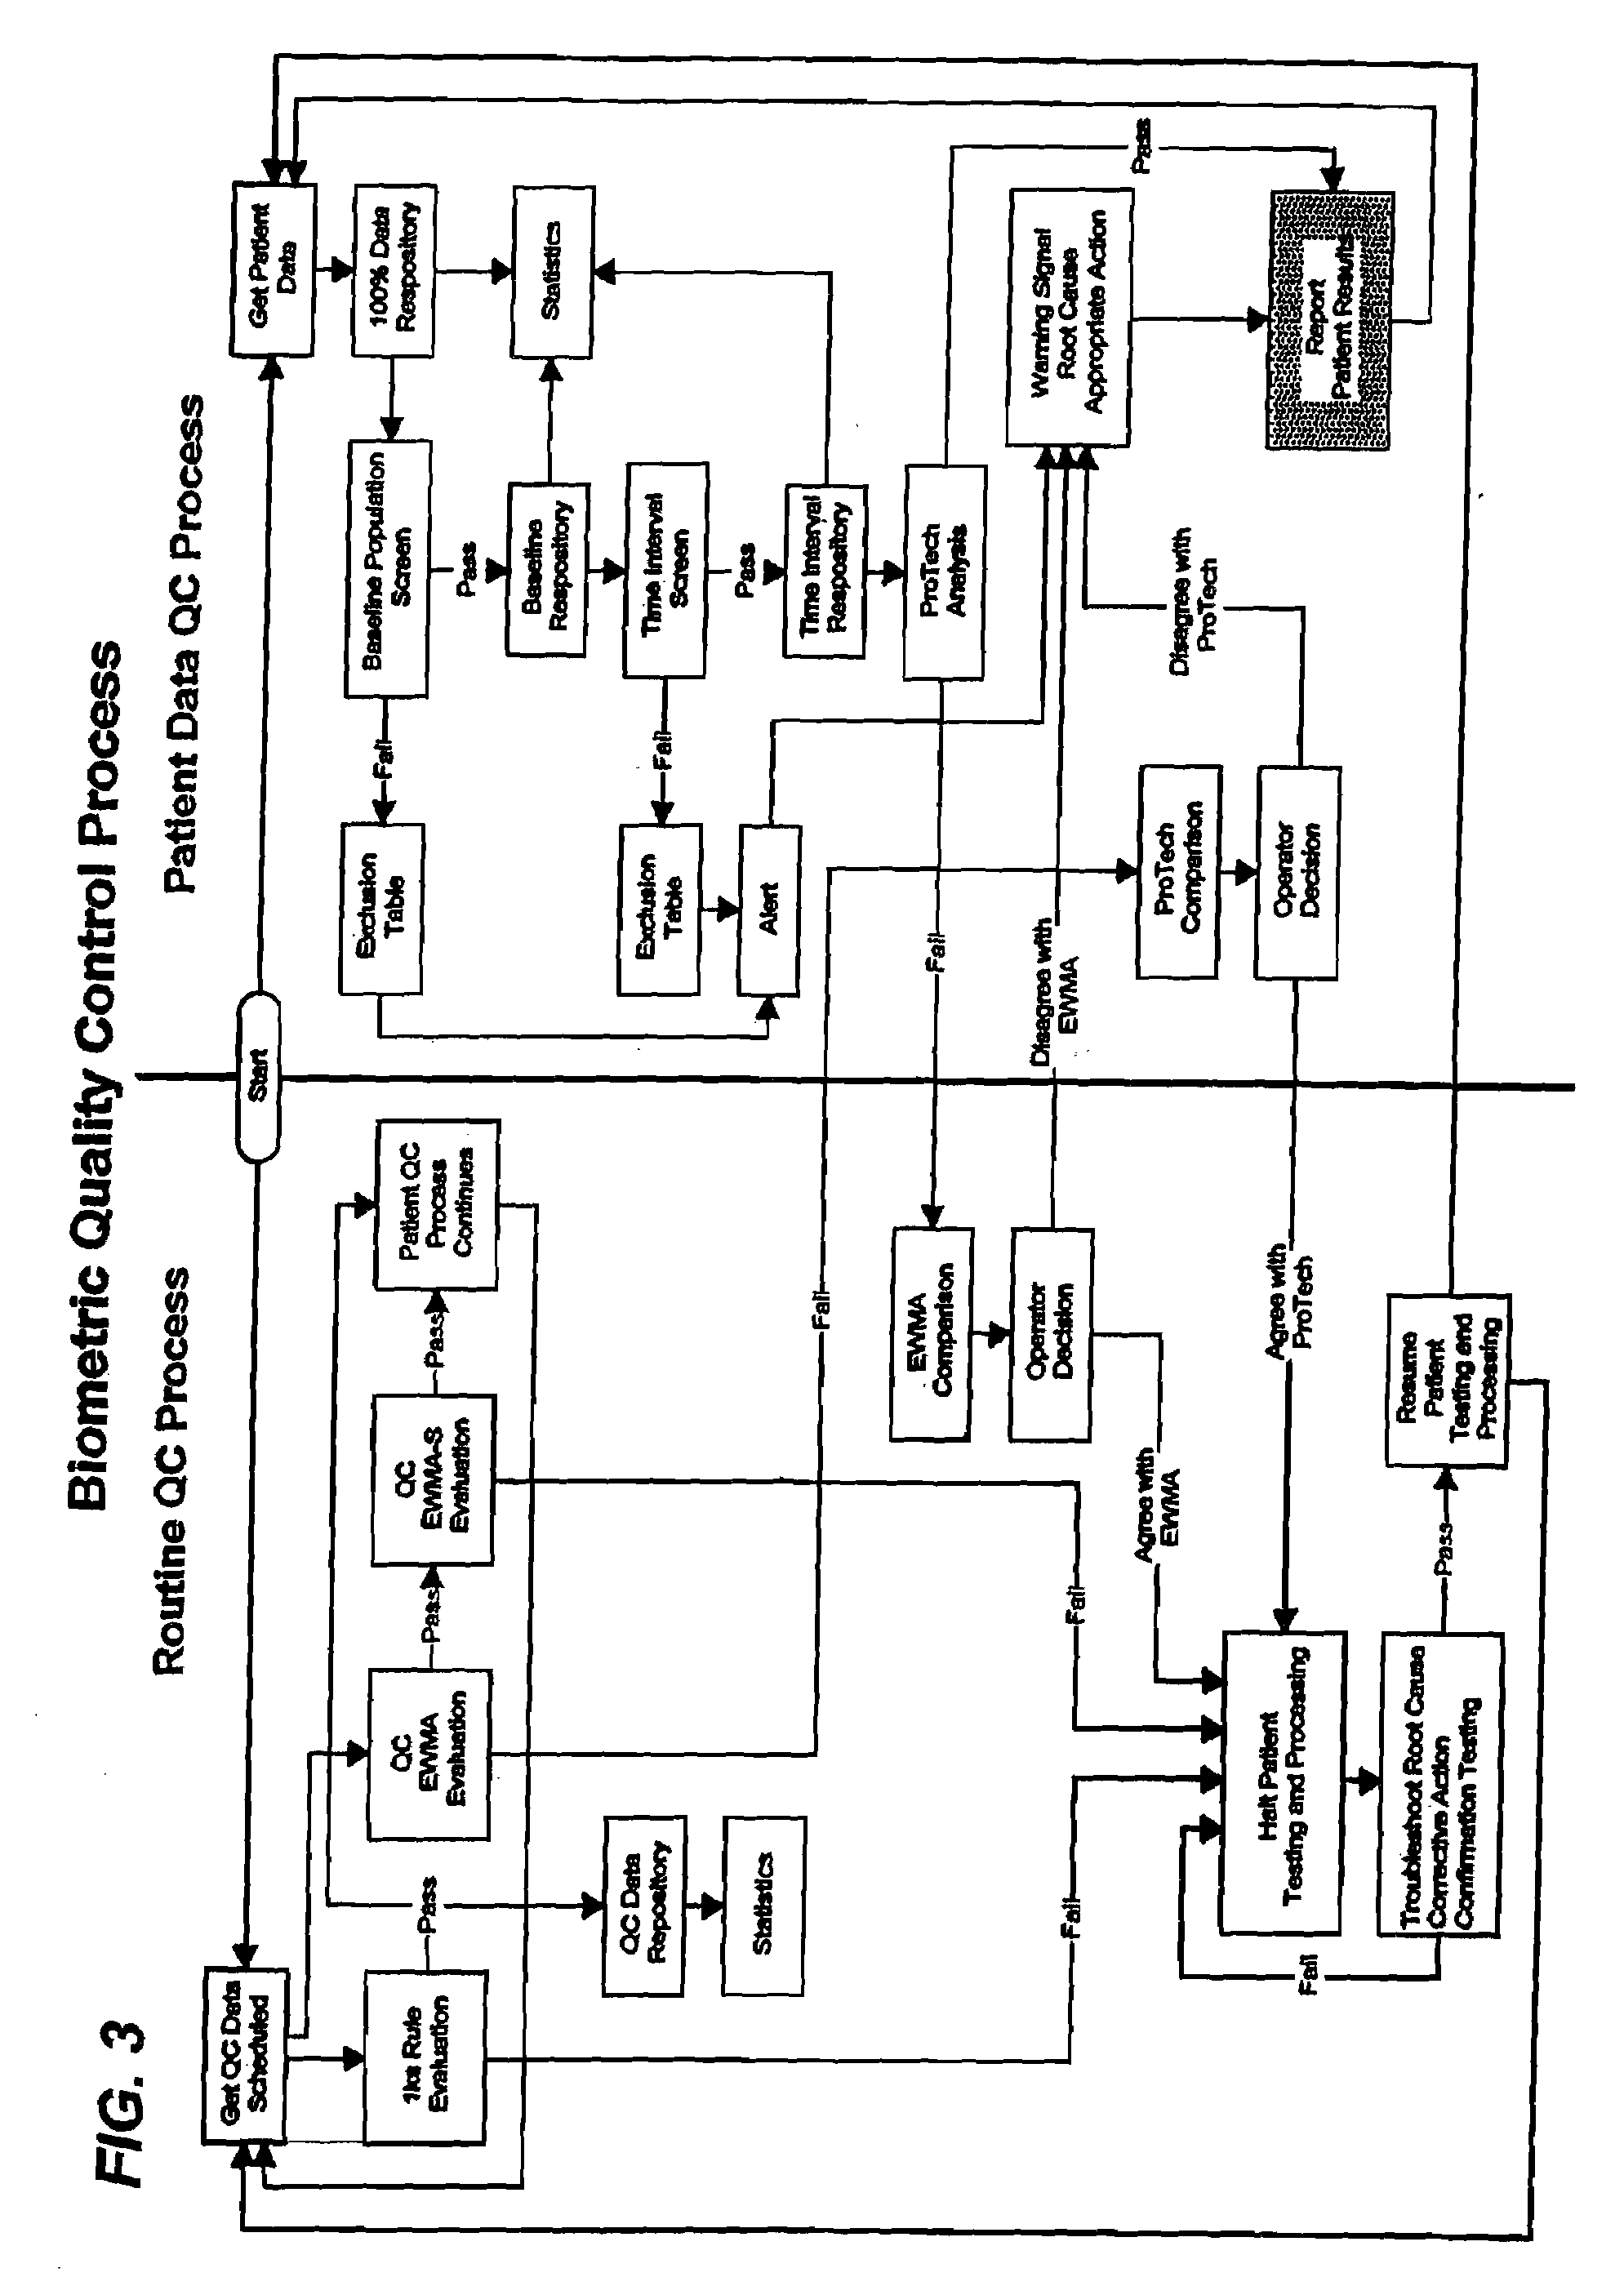 System and Method for Automatic Quality Control of Clinical Diagnostic Processes